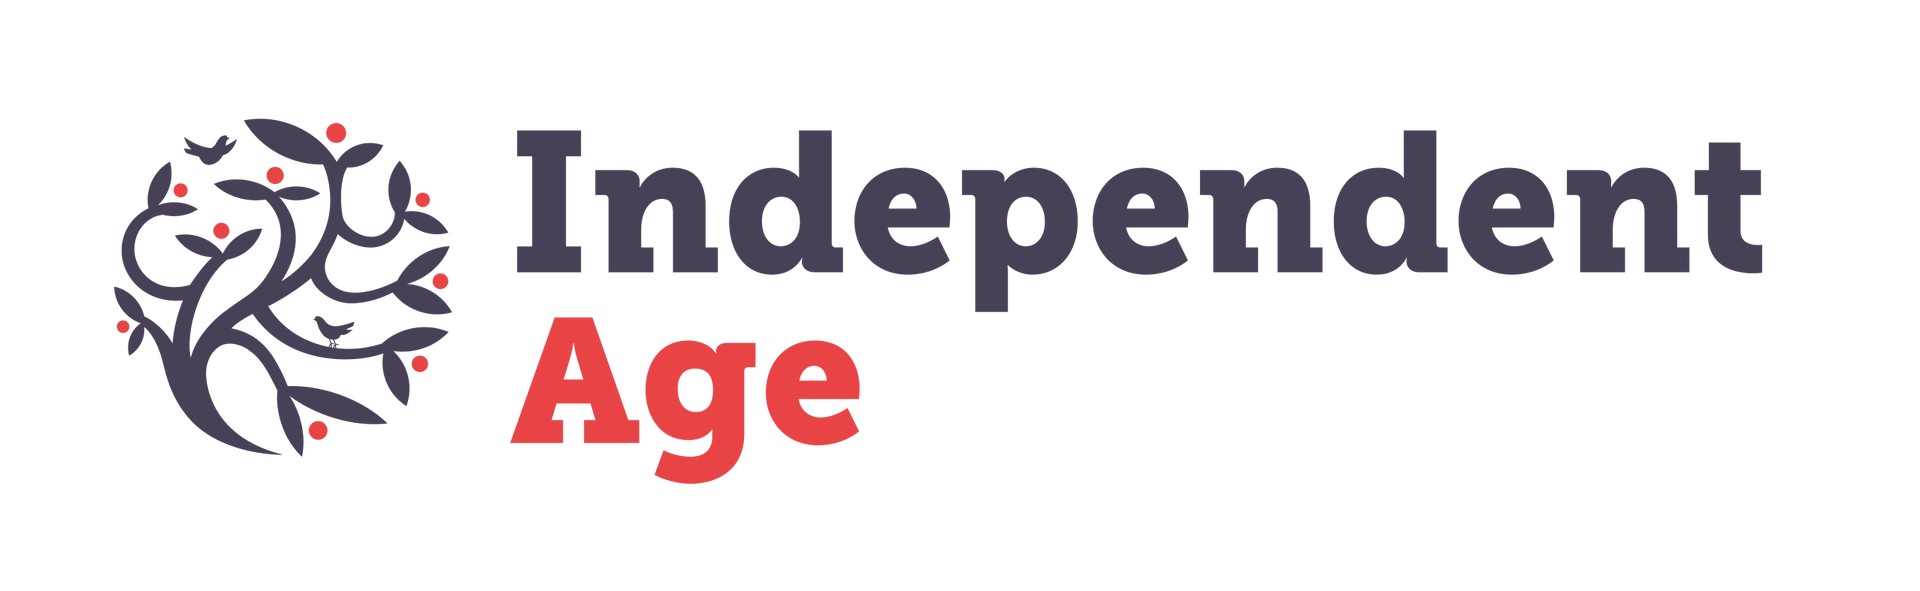 Independent age logo